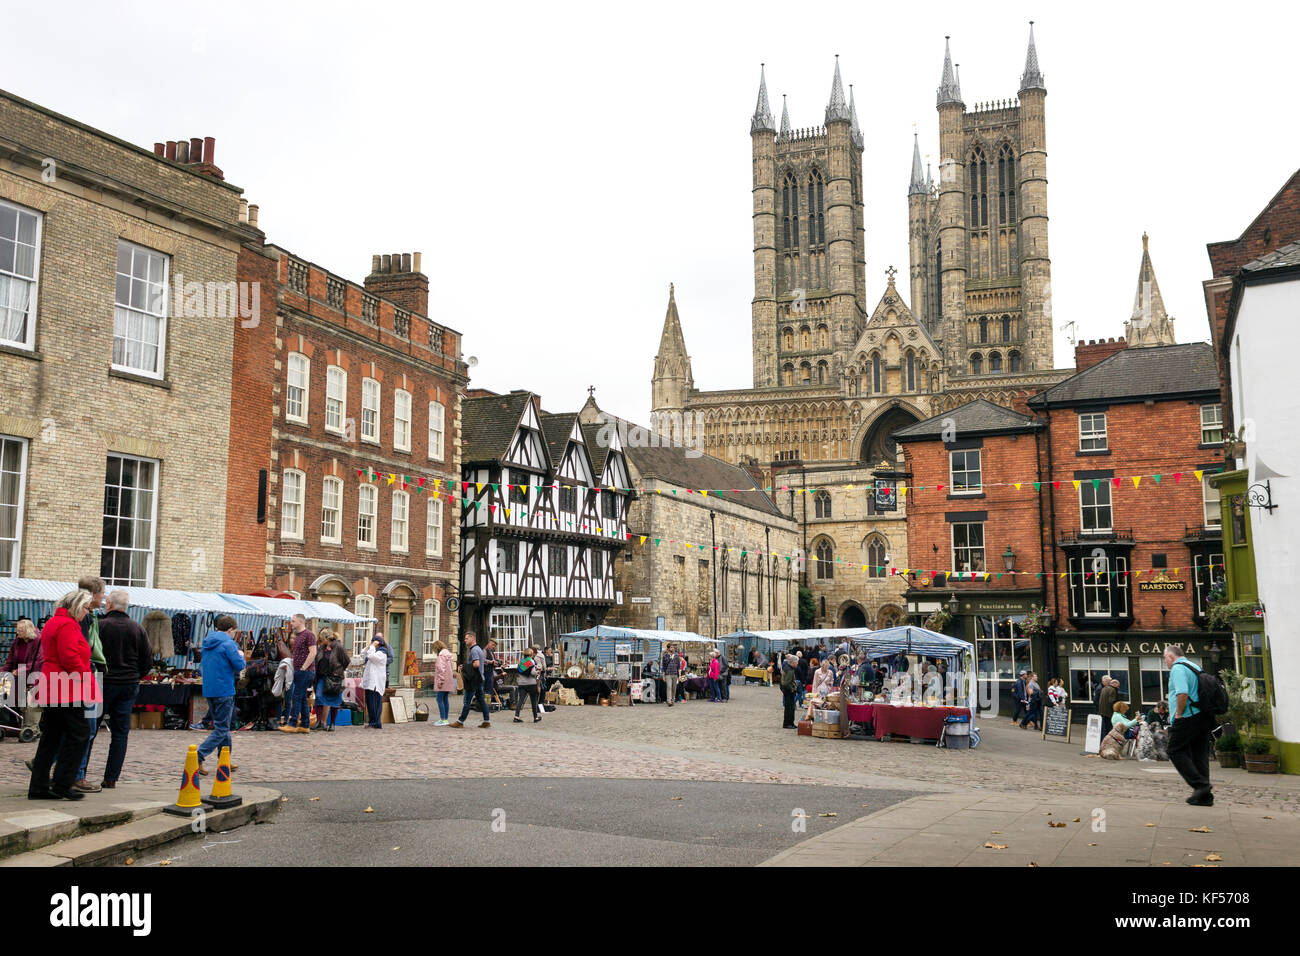 Englands East Midlands Lincolnshire, Medieval Lincoln Cathedral and Lincoln Market, Historic Site, Marketplace, Medieval Architecture, Castle Hill Stock Photo